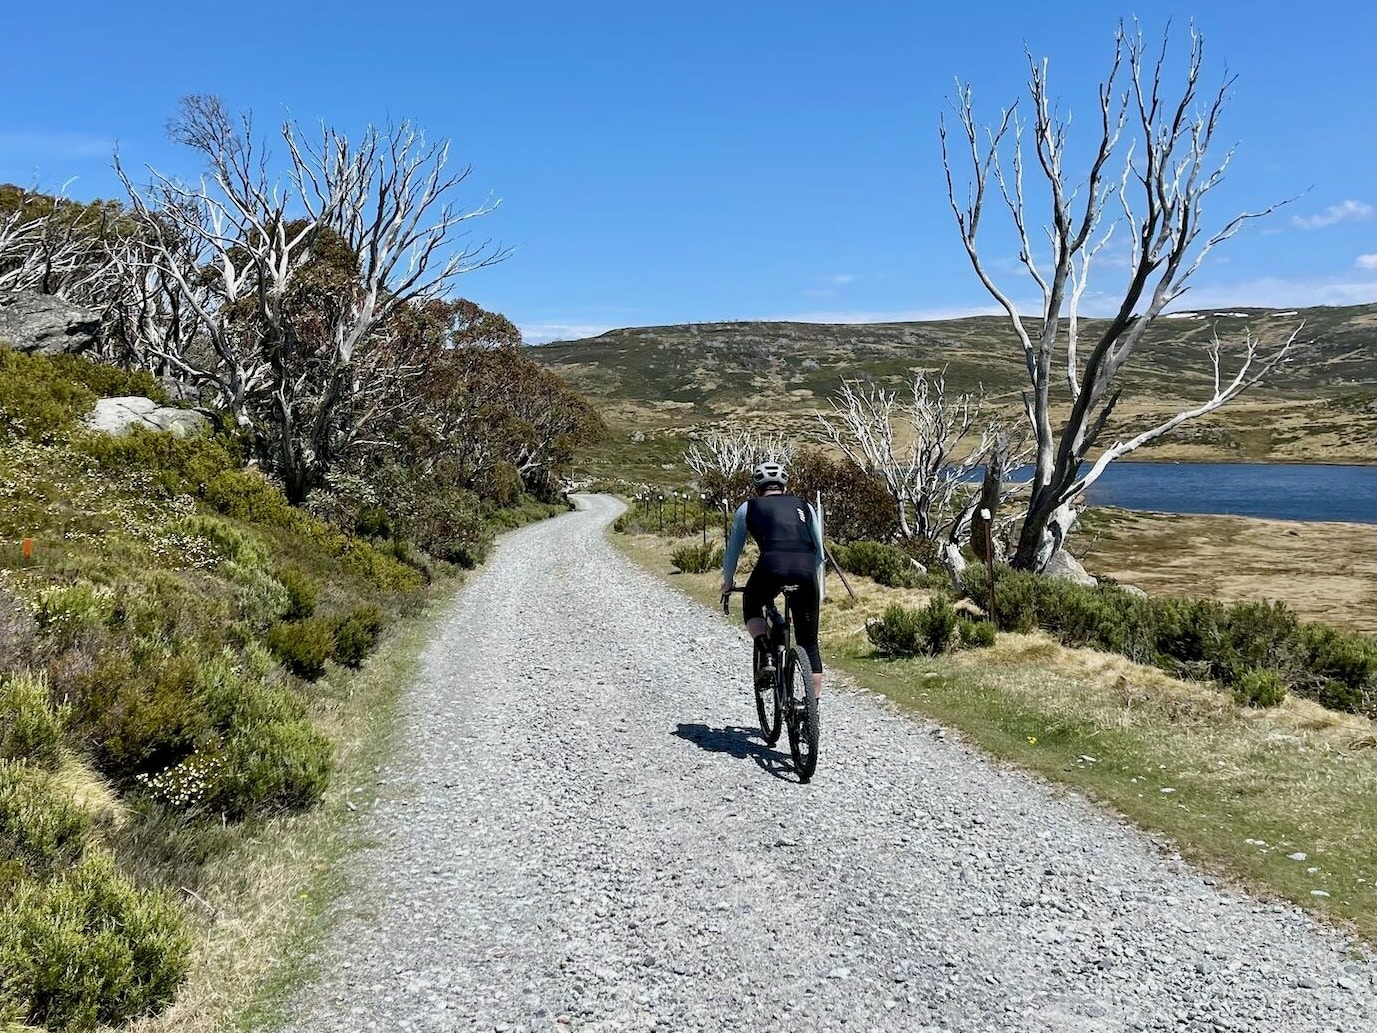 Cyclist riding on a gravel road in the high alpine region with snowgums and lake in the background on a sunny day